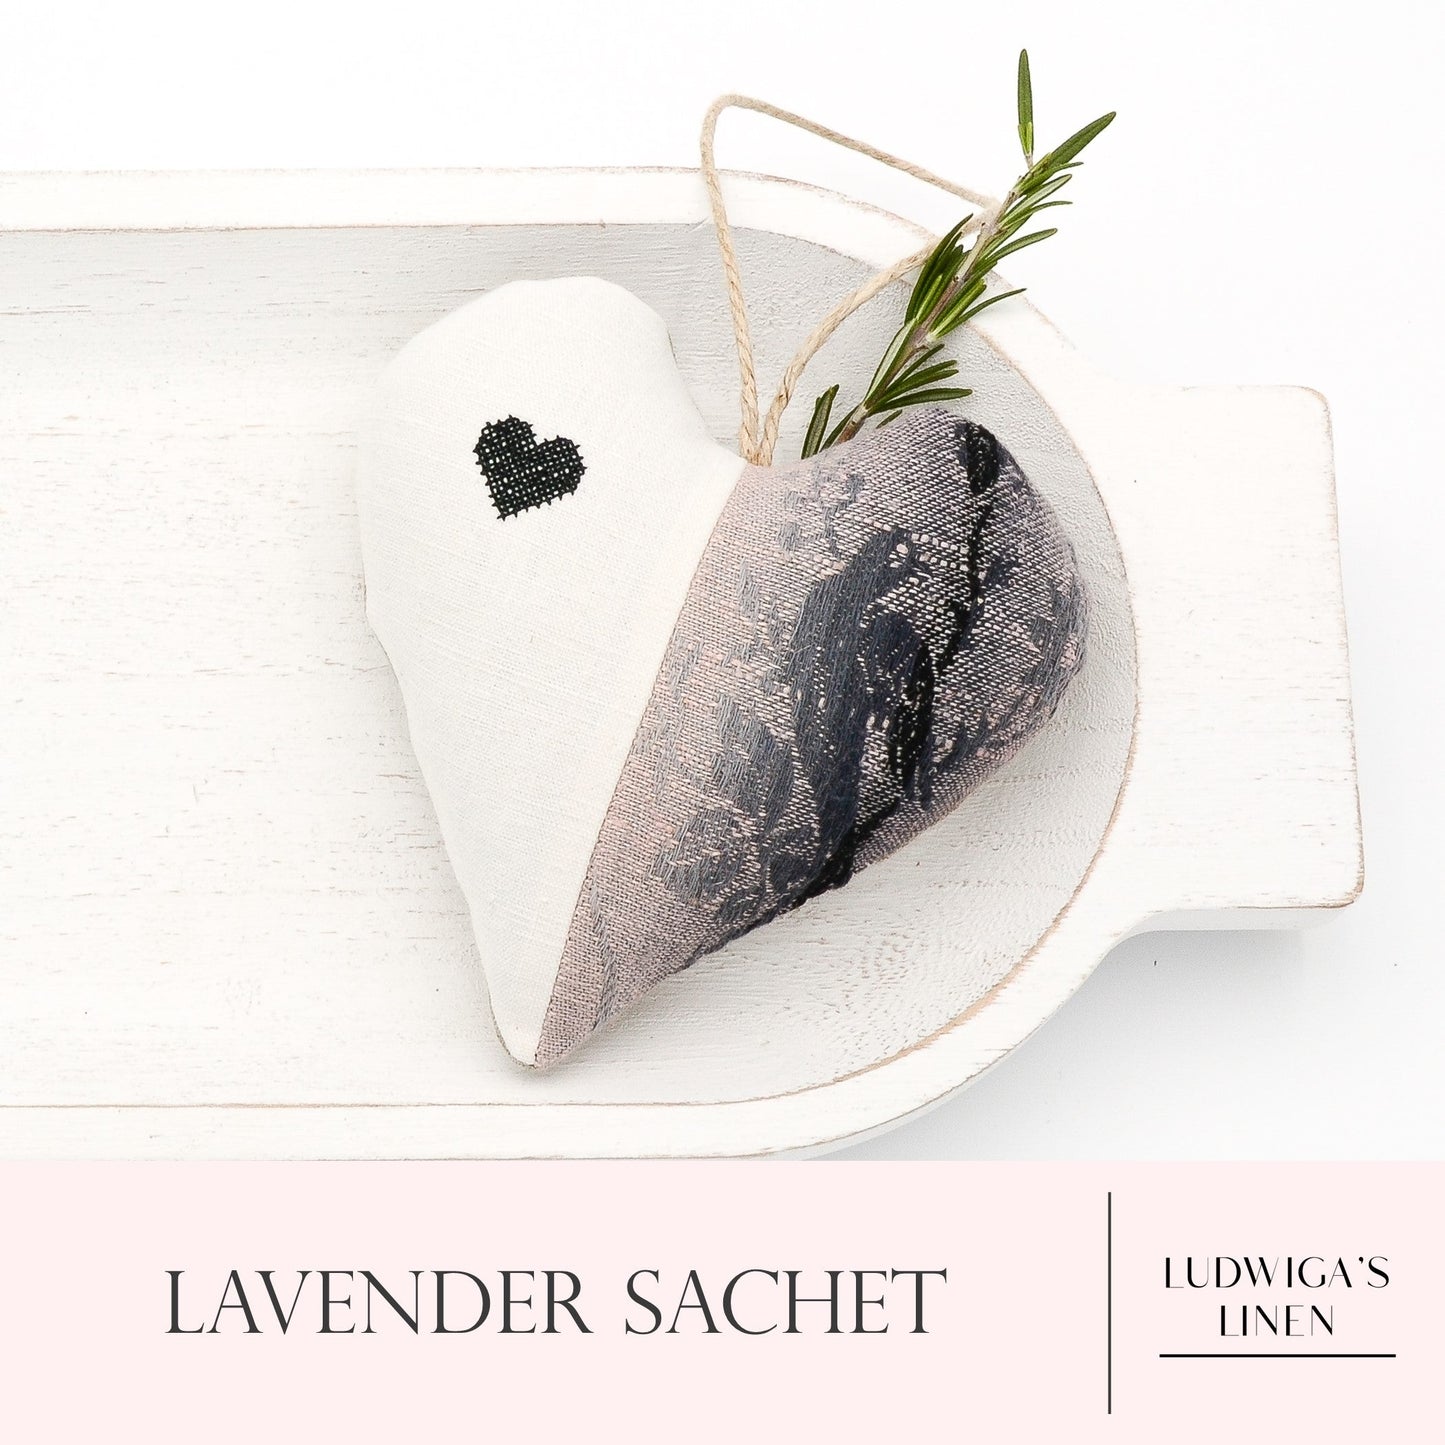 Antique/vintage French cotton and European white linen lavender sachet heart with black embroidered heart, hemp twine tie and filled with high quality lavender from Provence France